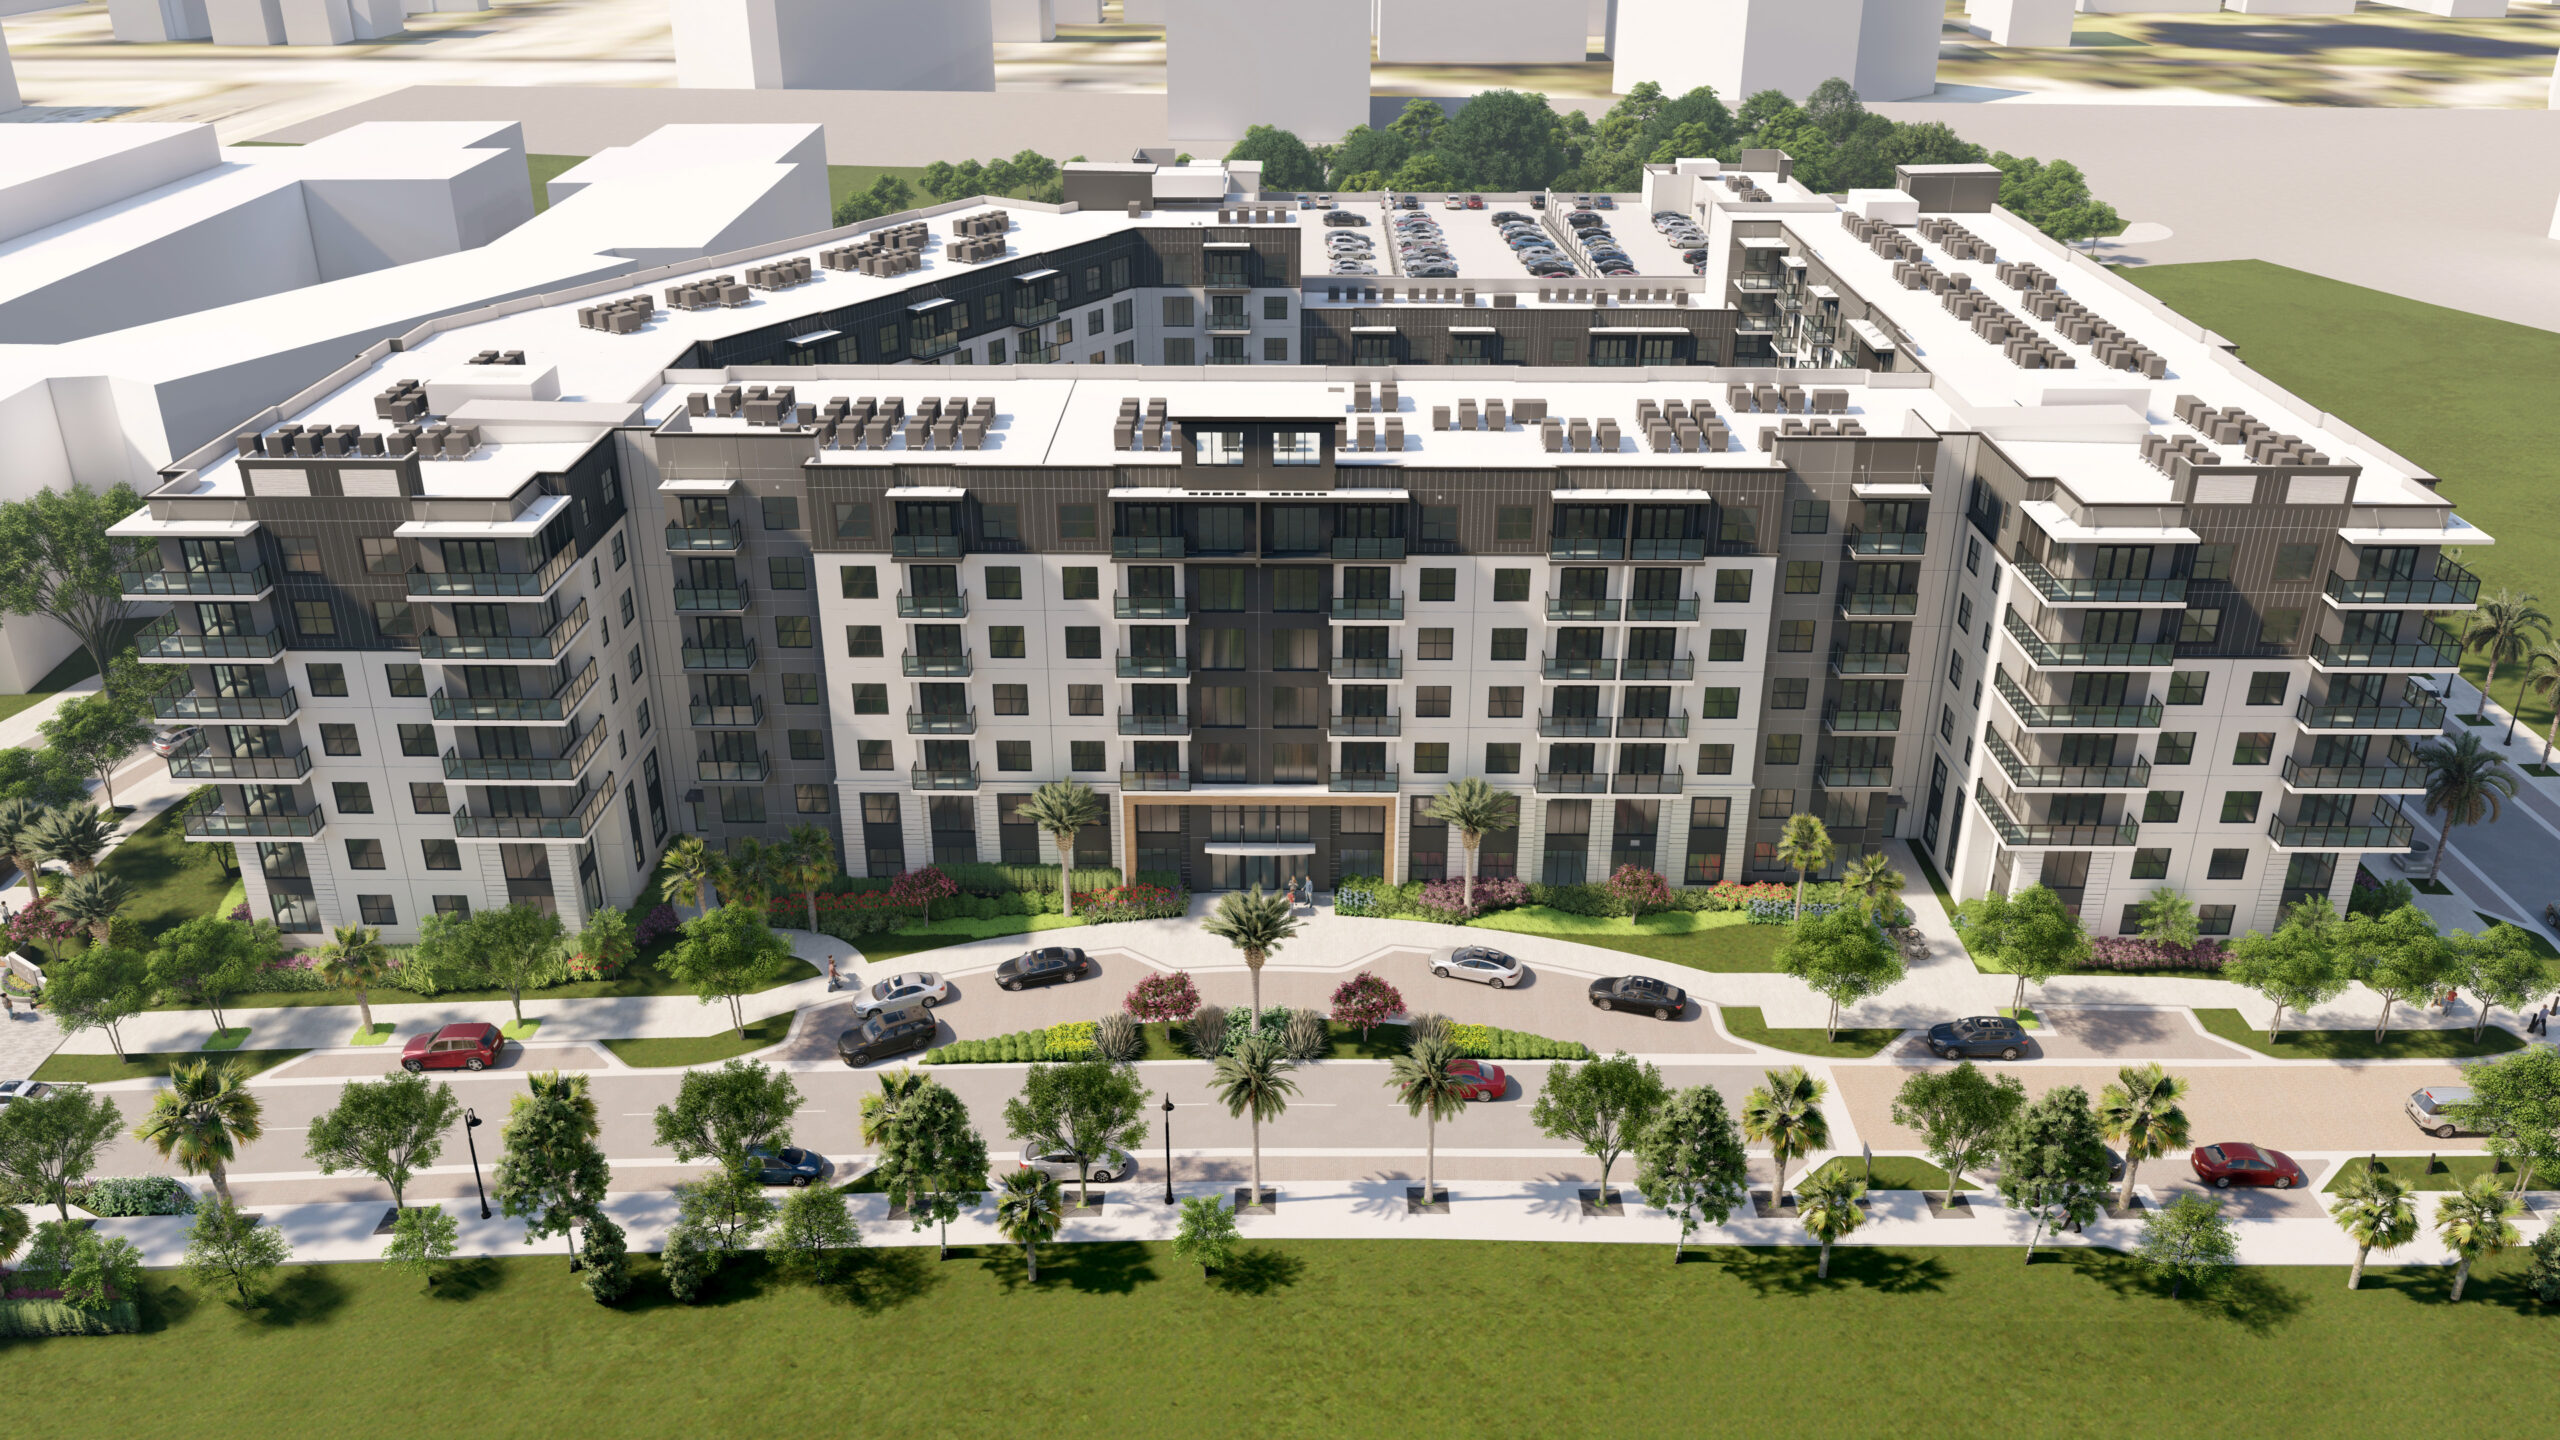 Rendering of Centerpointe apartments